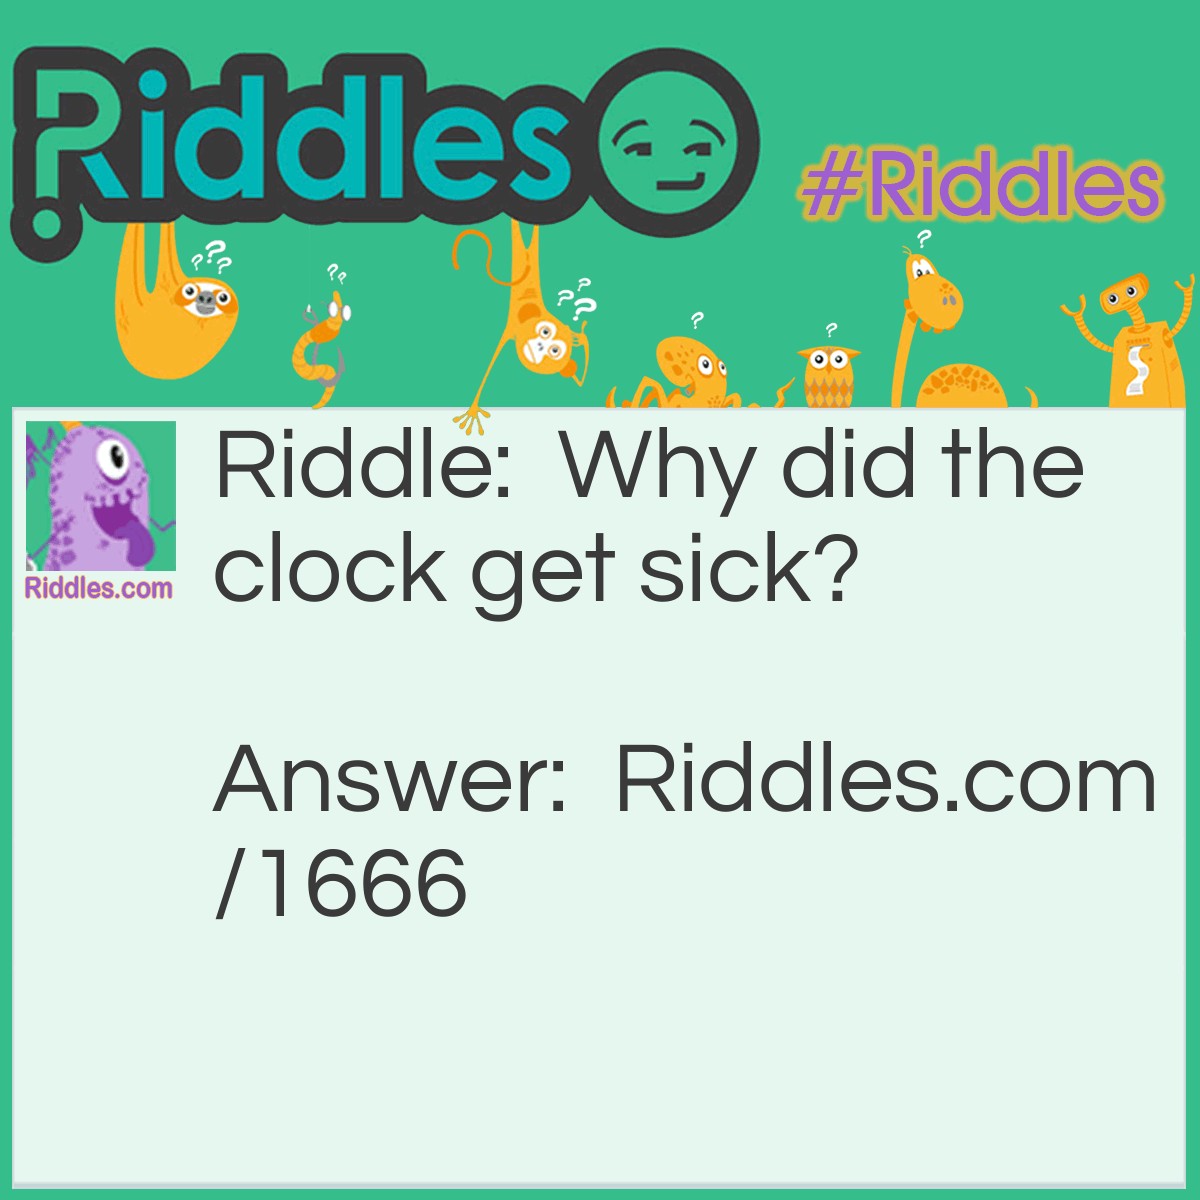 Riddle: Why did the clock get sick? Answer: It was run down.